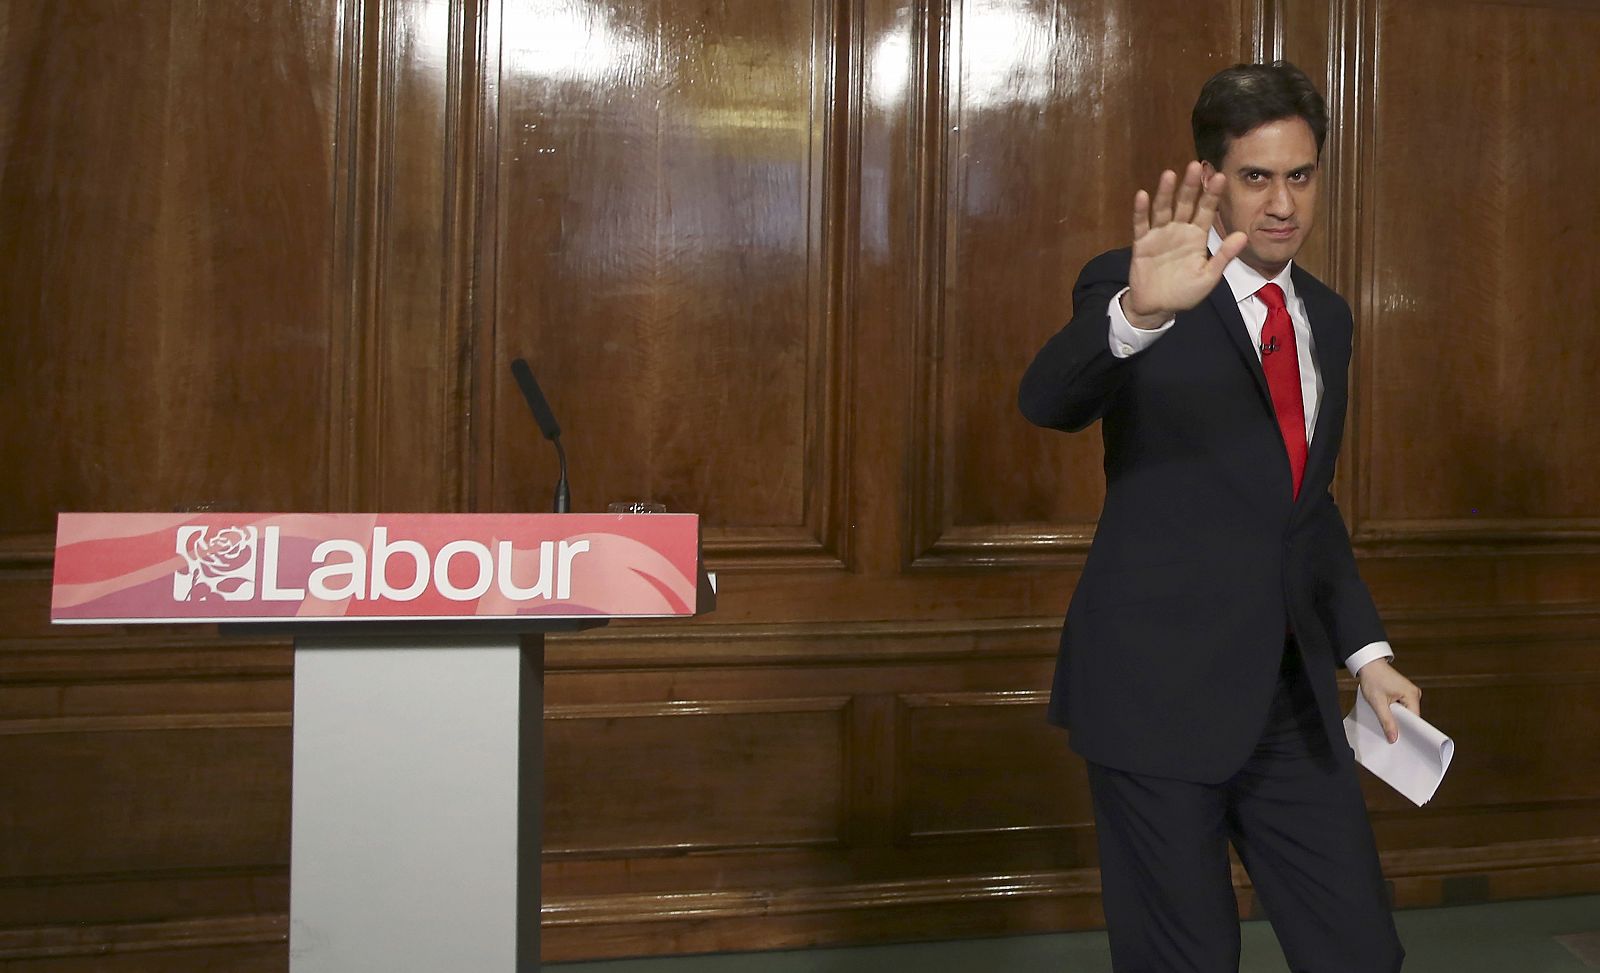 Britain's opposition Labour Party leader Ed Miliband waves after announcing his resignation as leader at a news conference in London